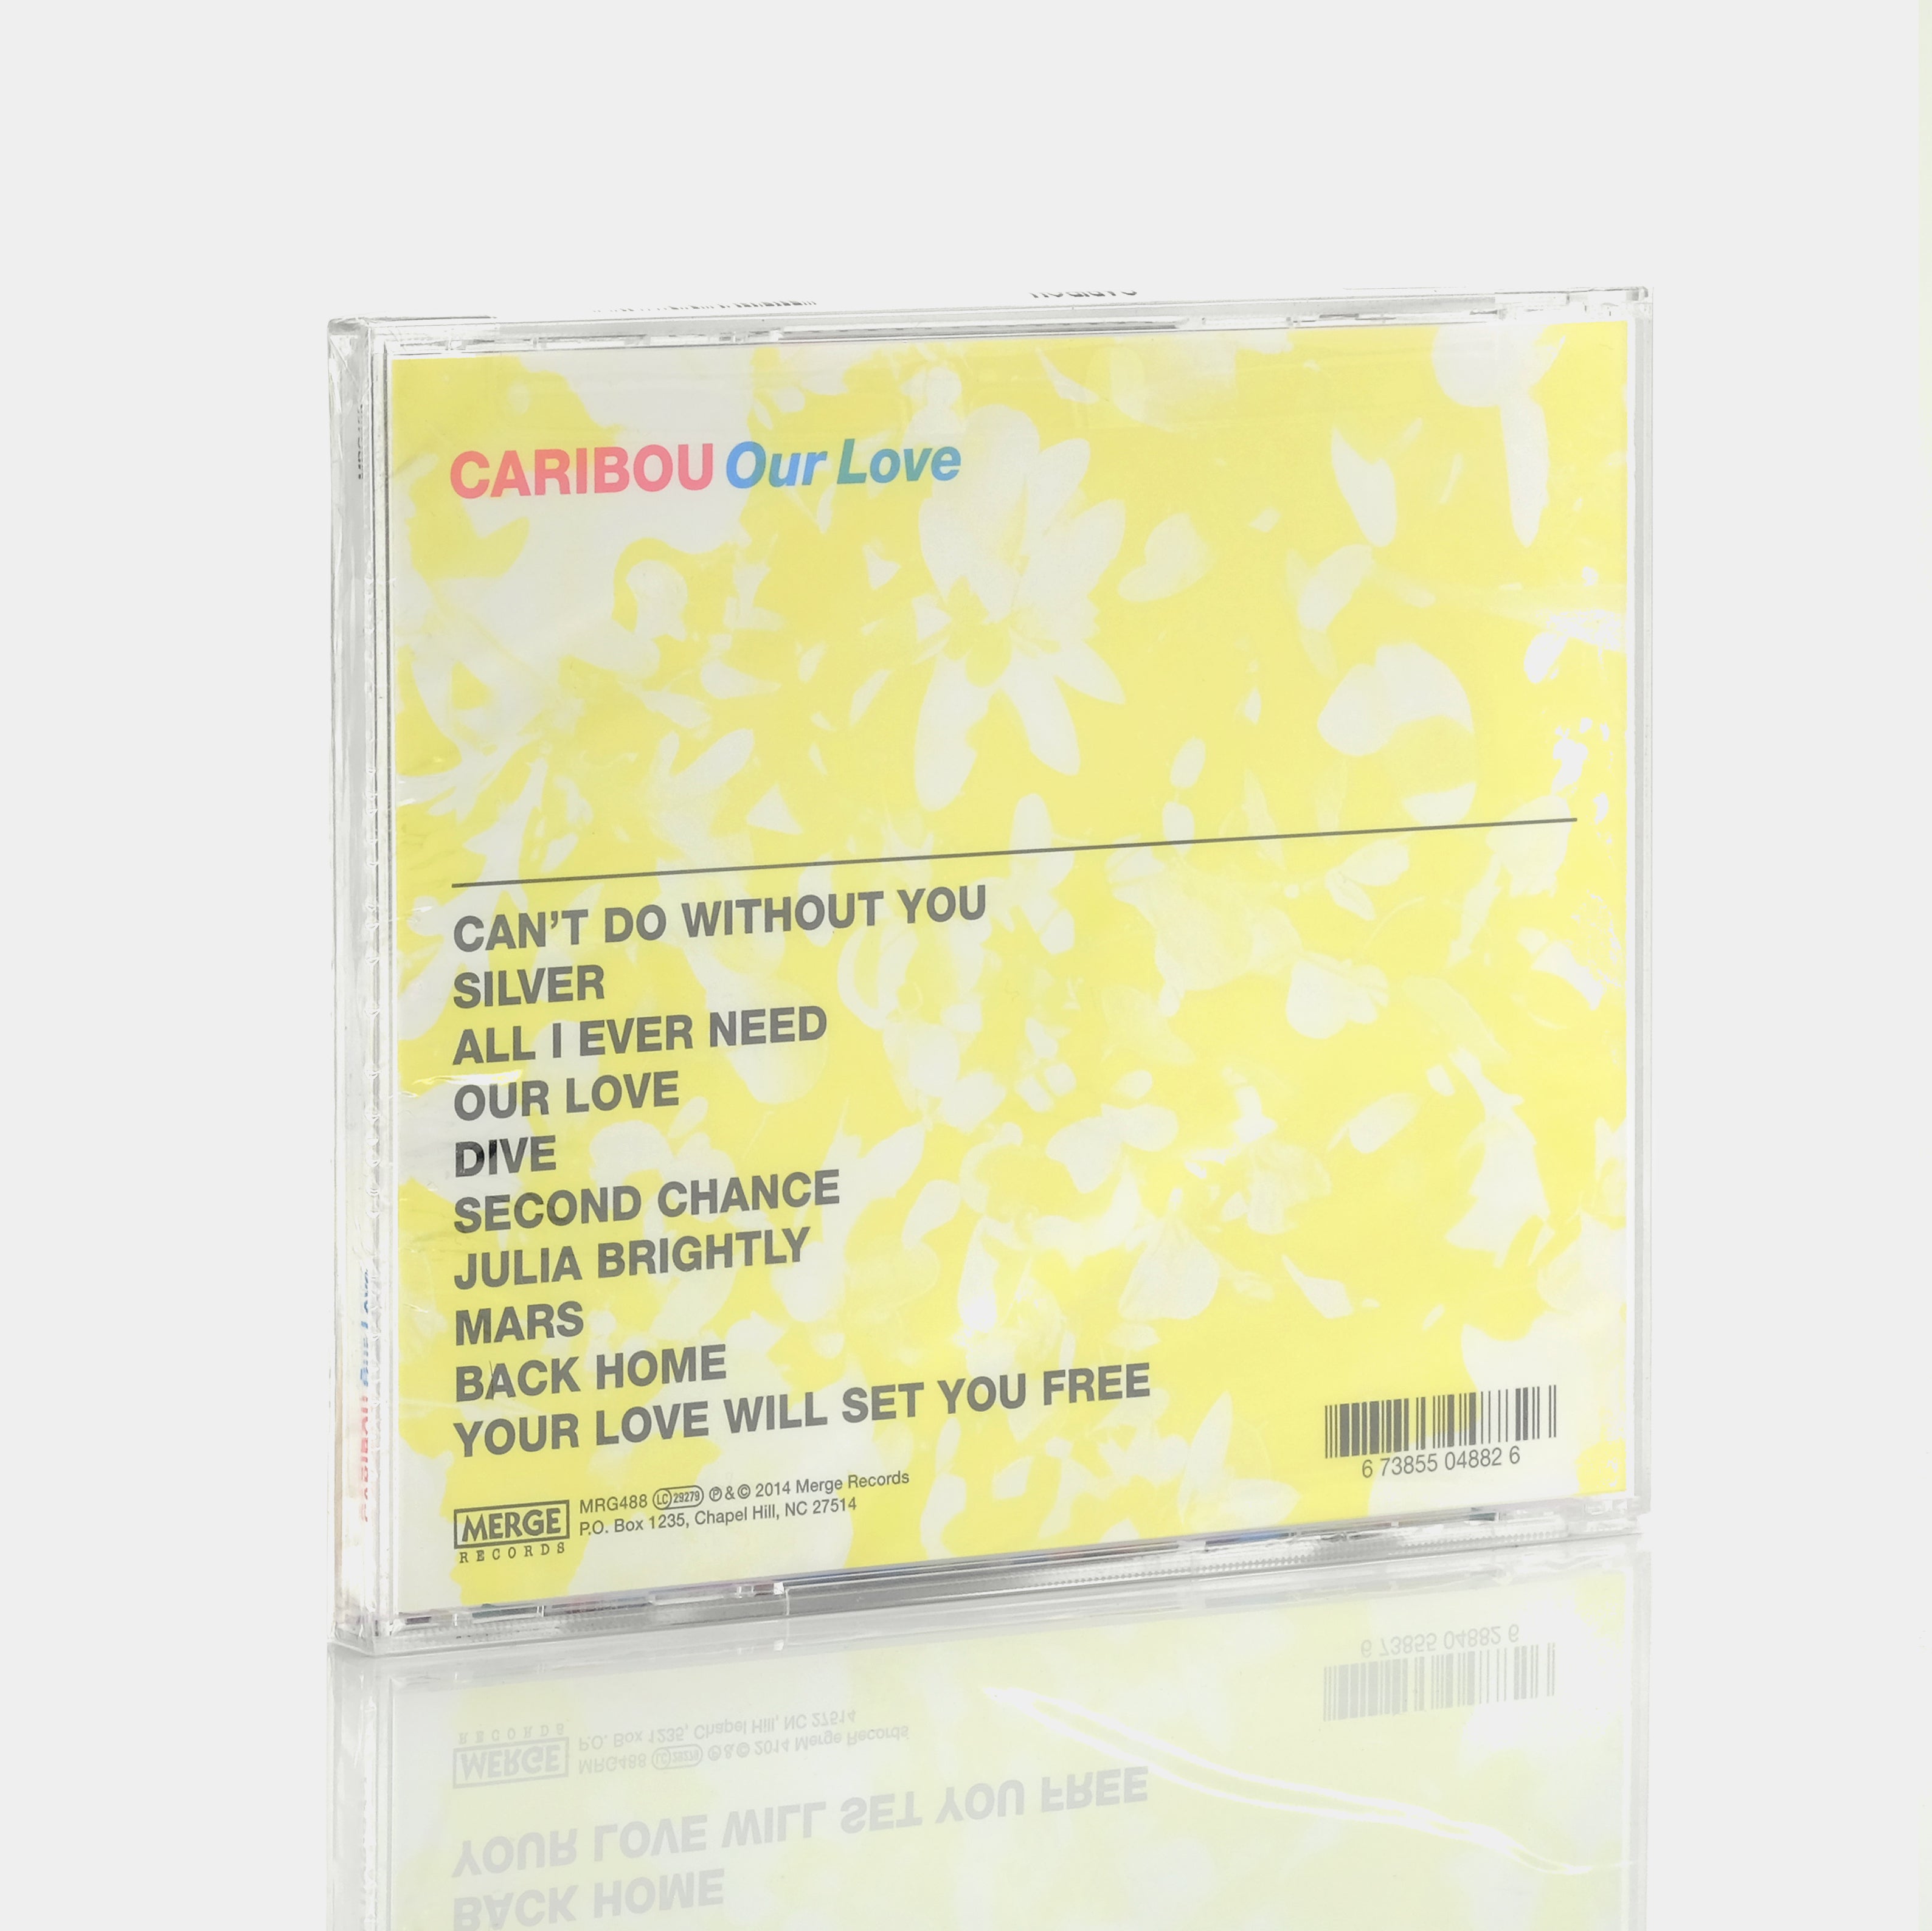 Caribou - Our Love CD